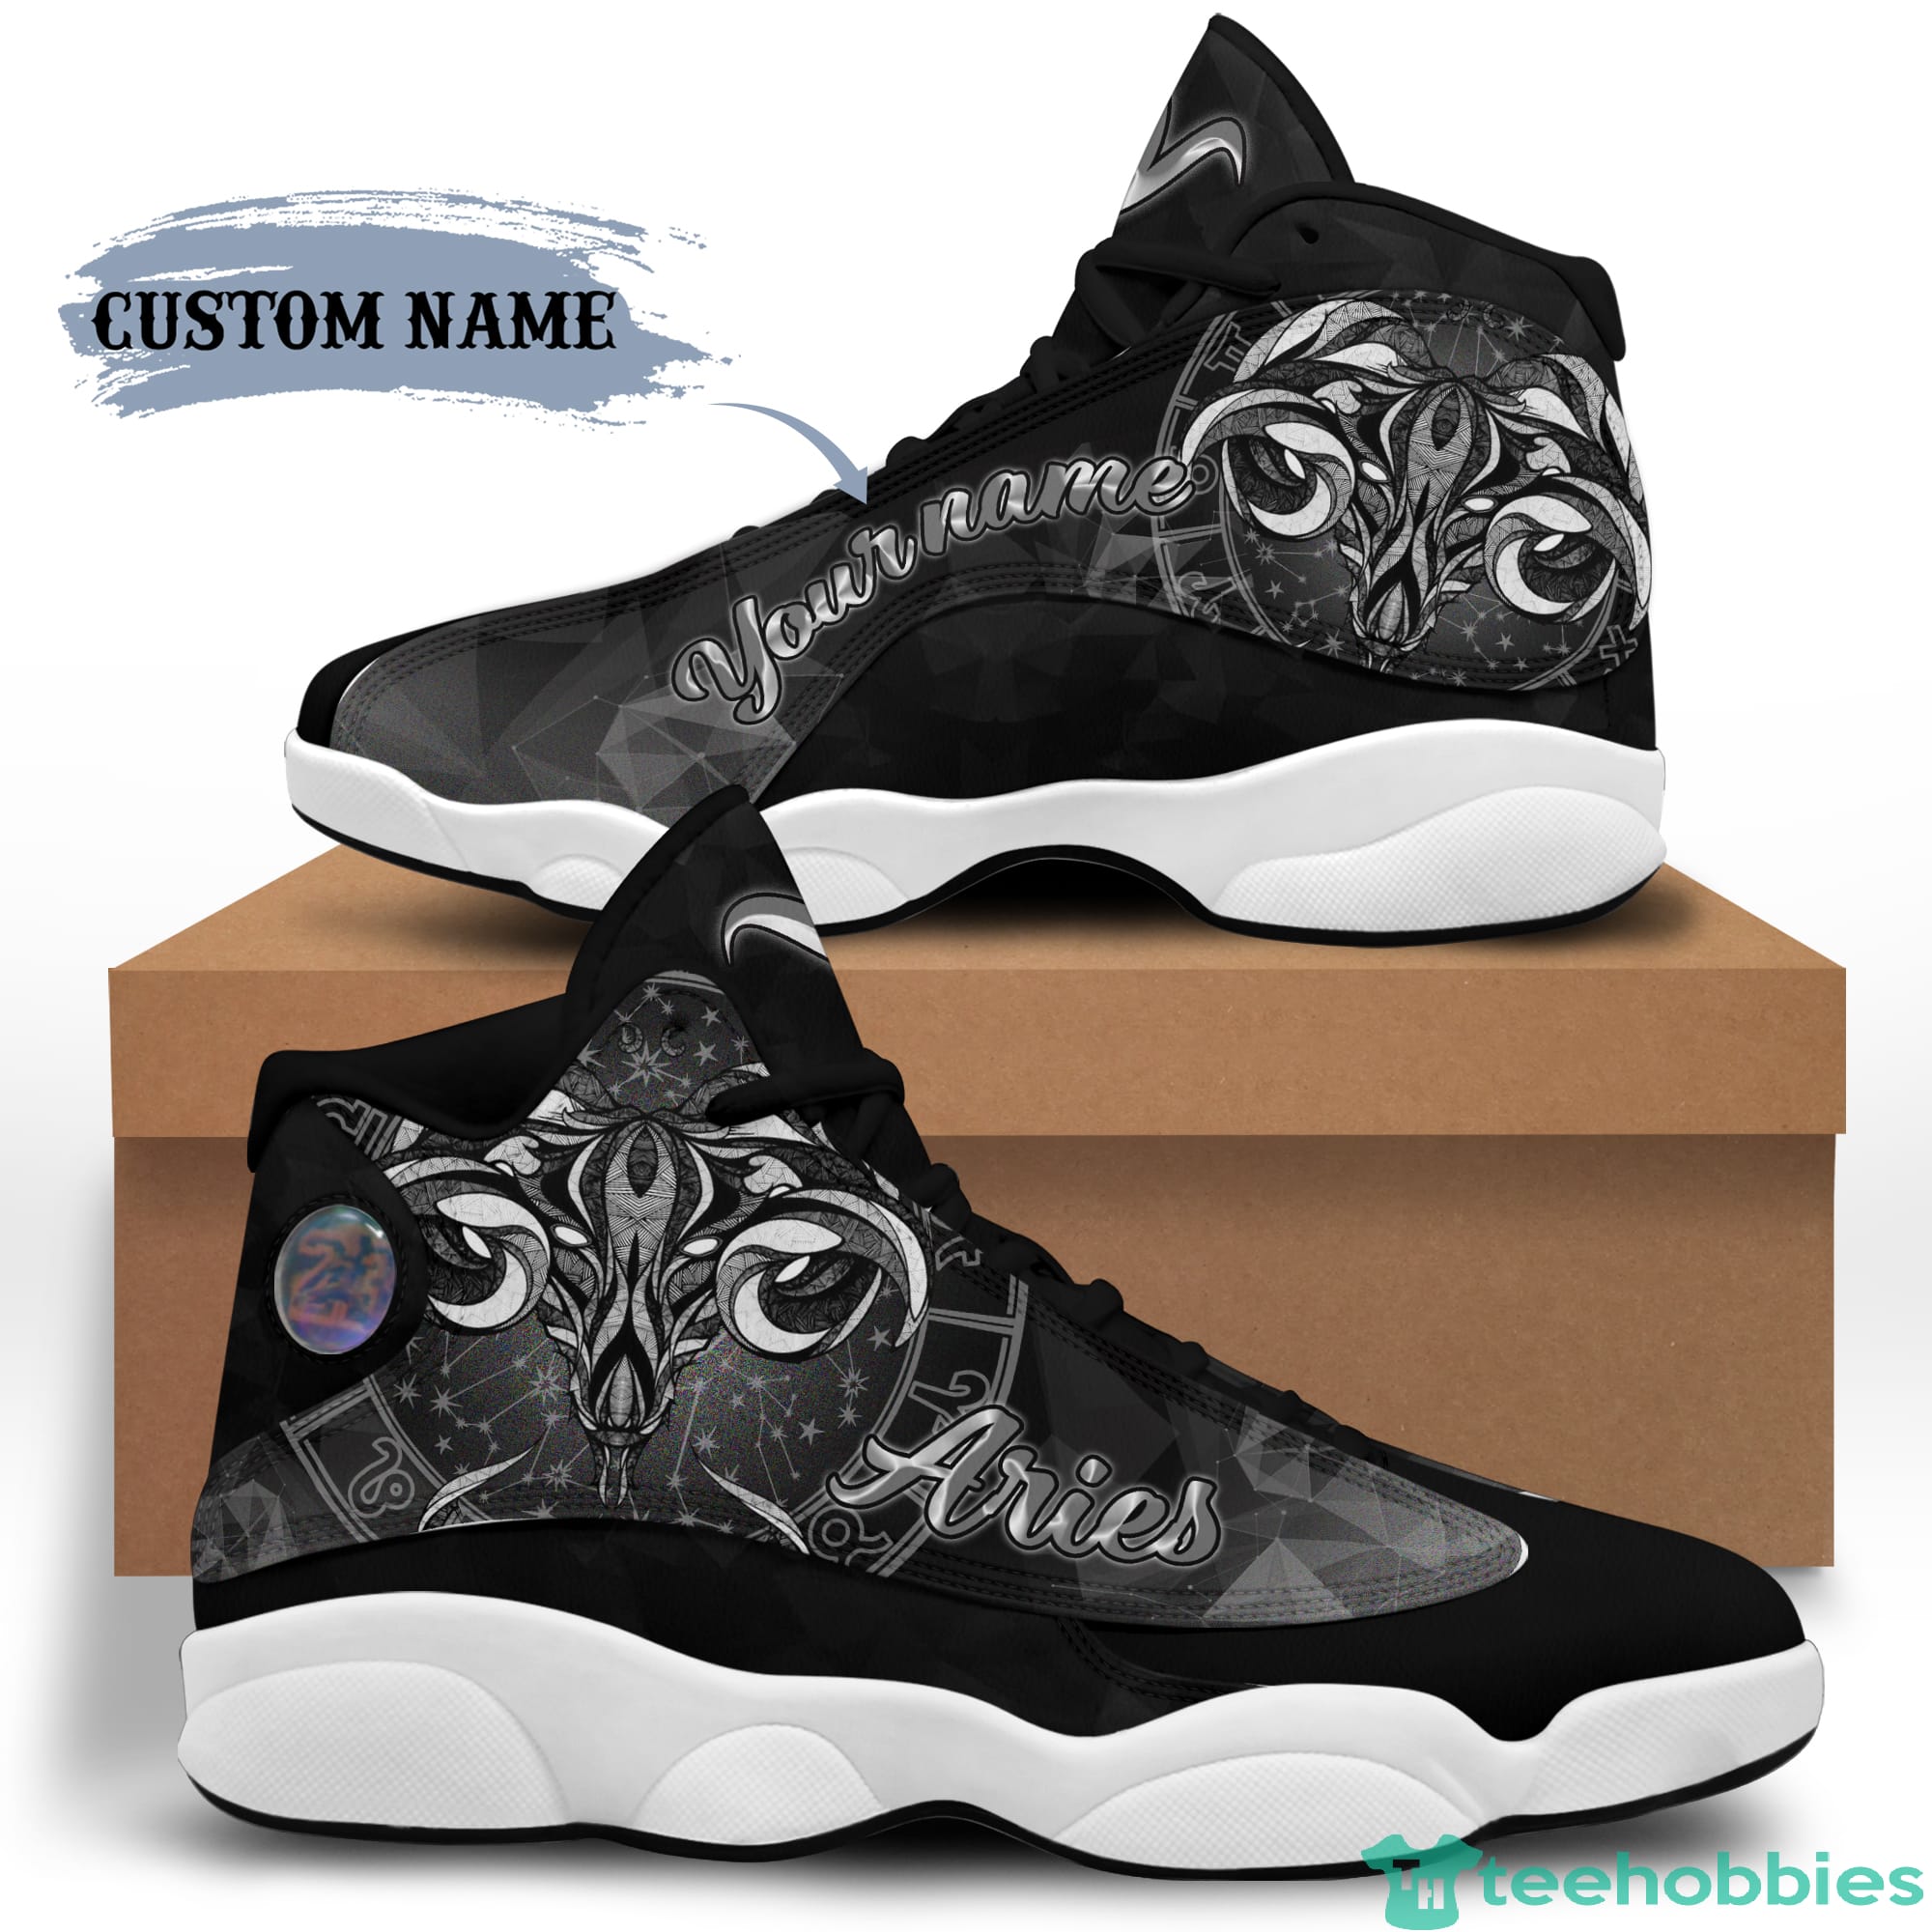 Aries Birthday Gift Personalized Name Personalized Name Air Jordan 13 Shoes SKU-281